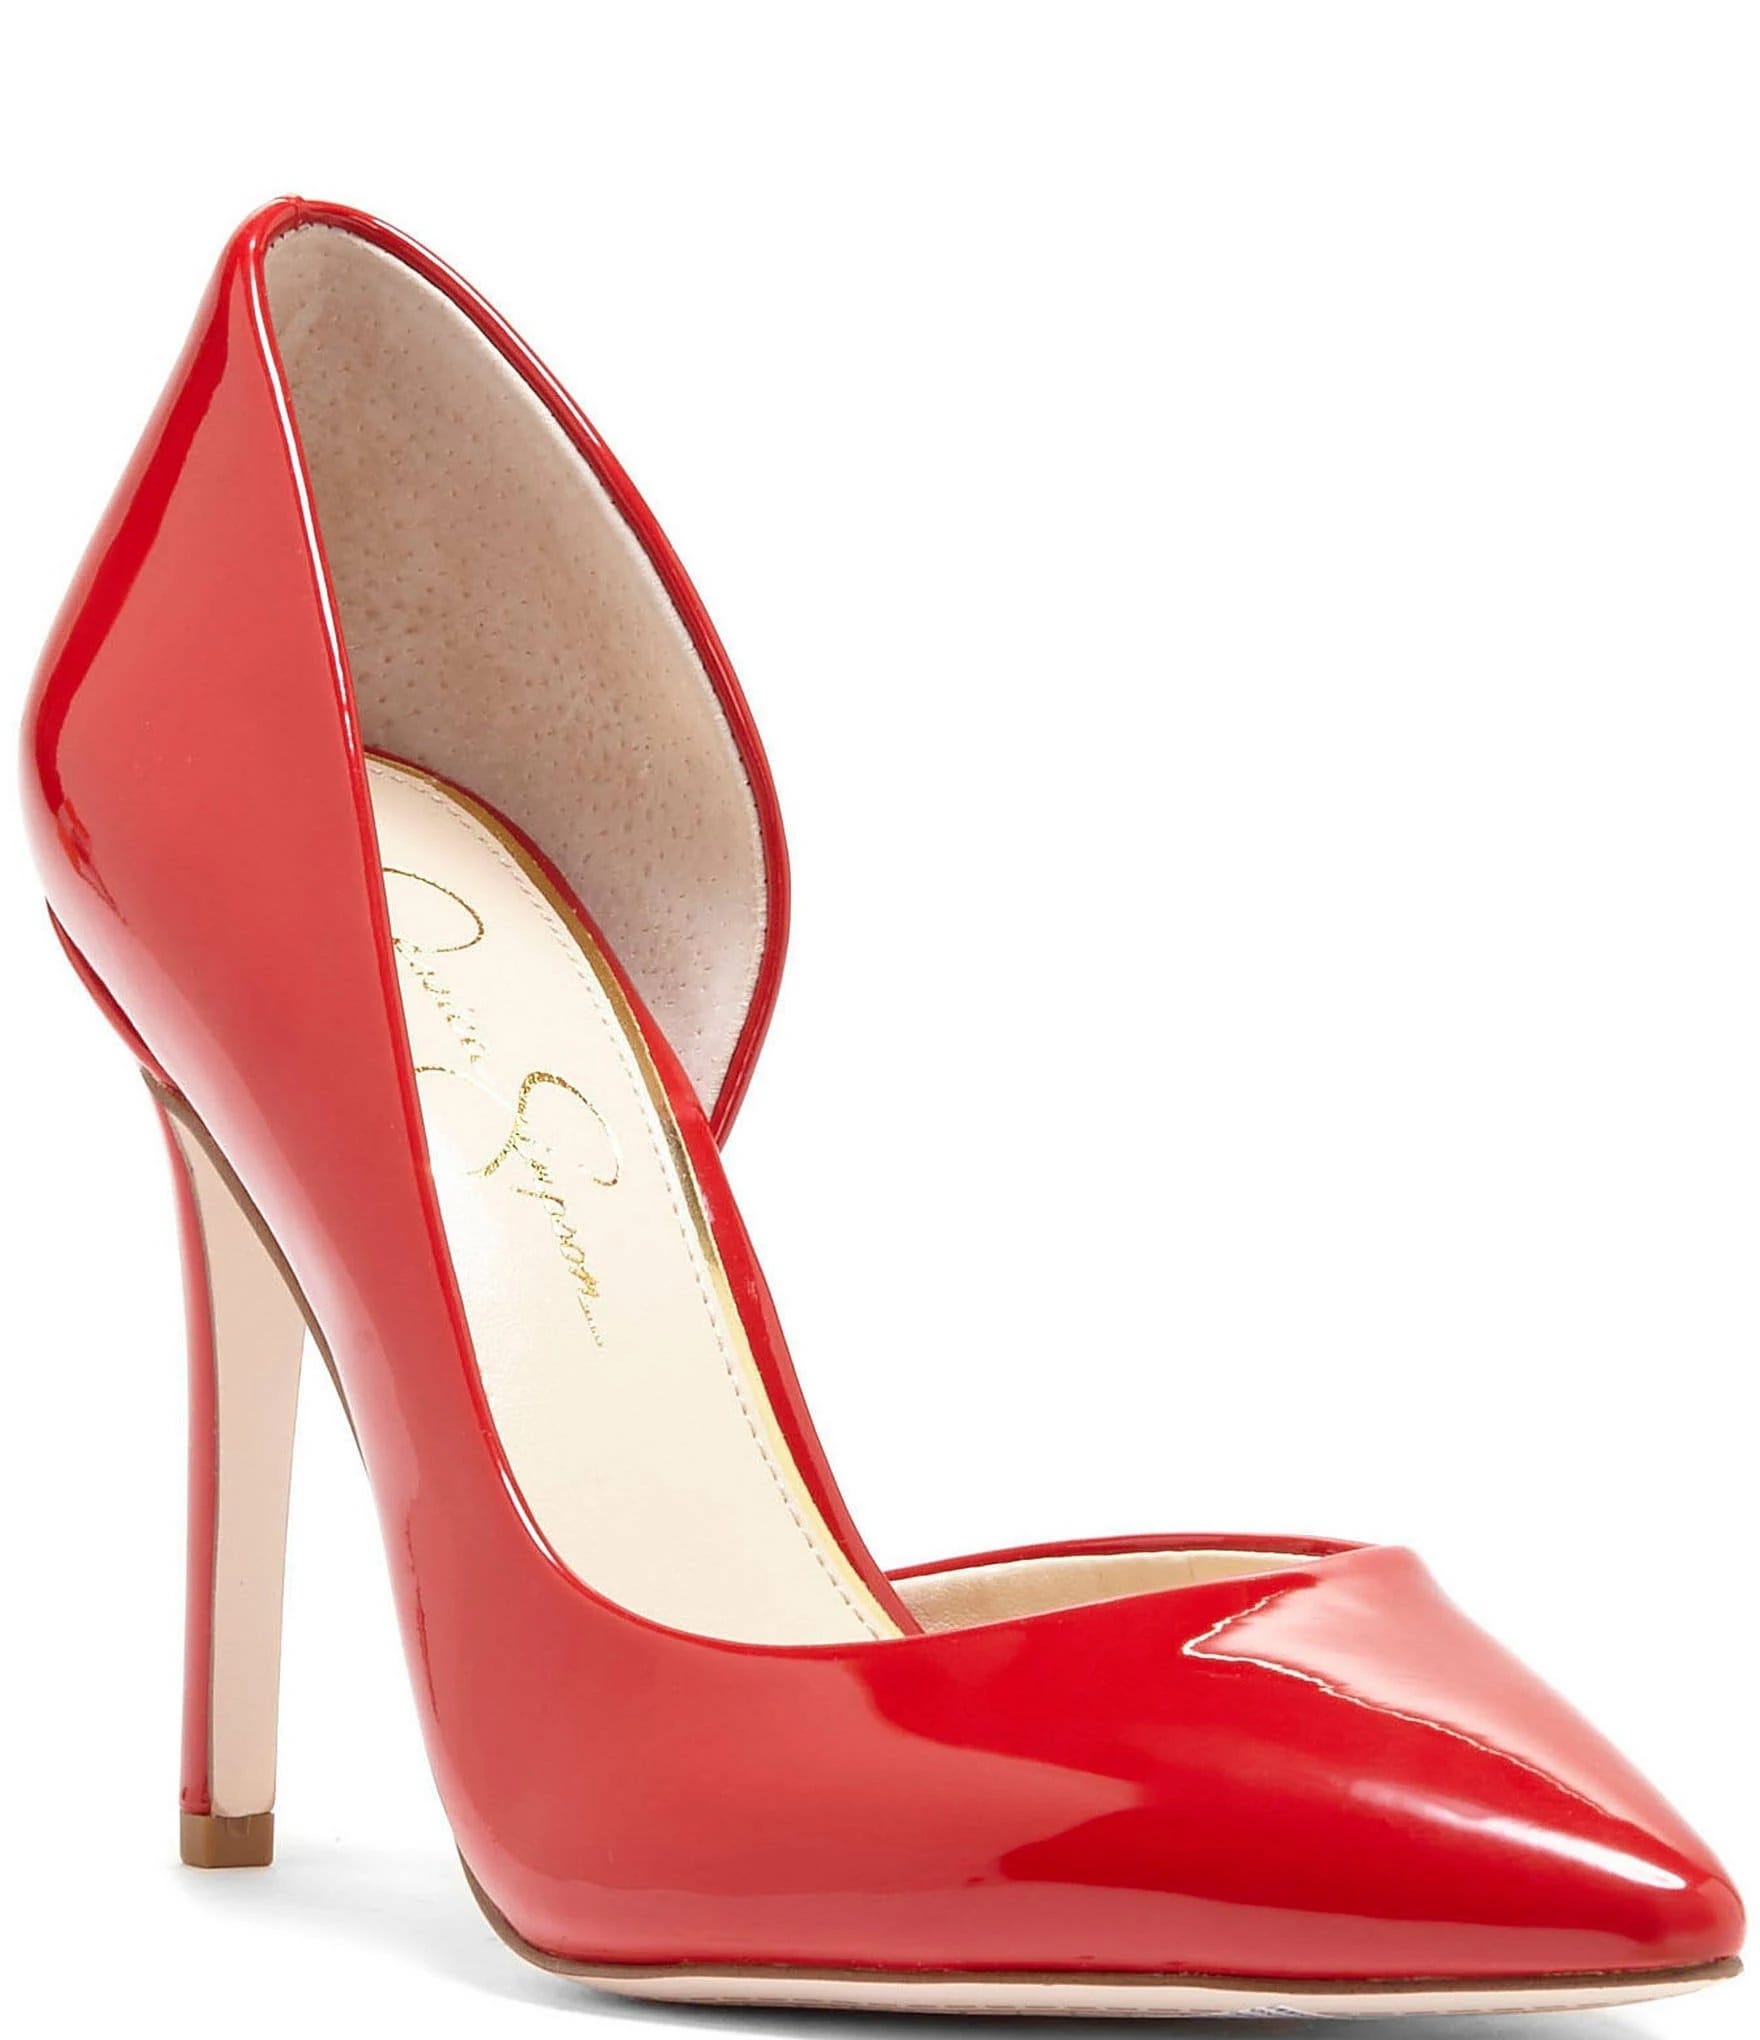 Jessica Simpson Patent D'Orsay Flare Pumps: Attractively Designed, Comformable, and Durable | Image